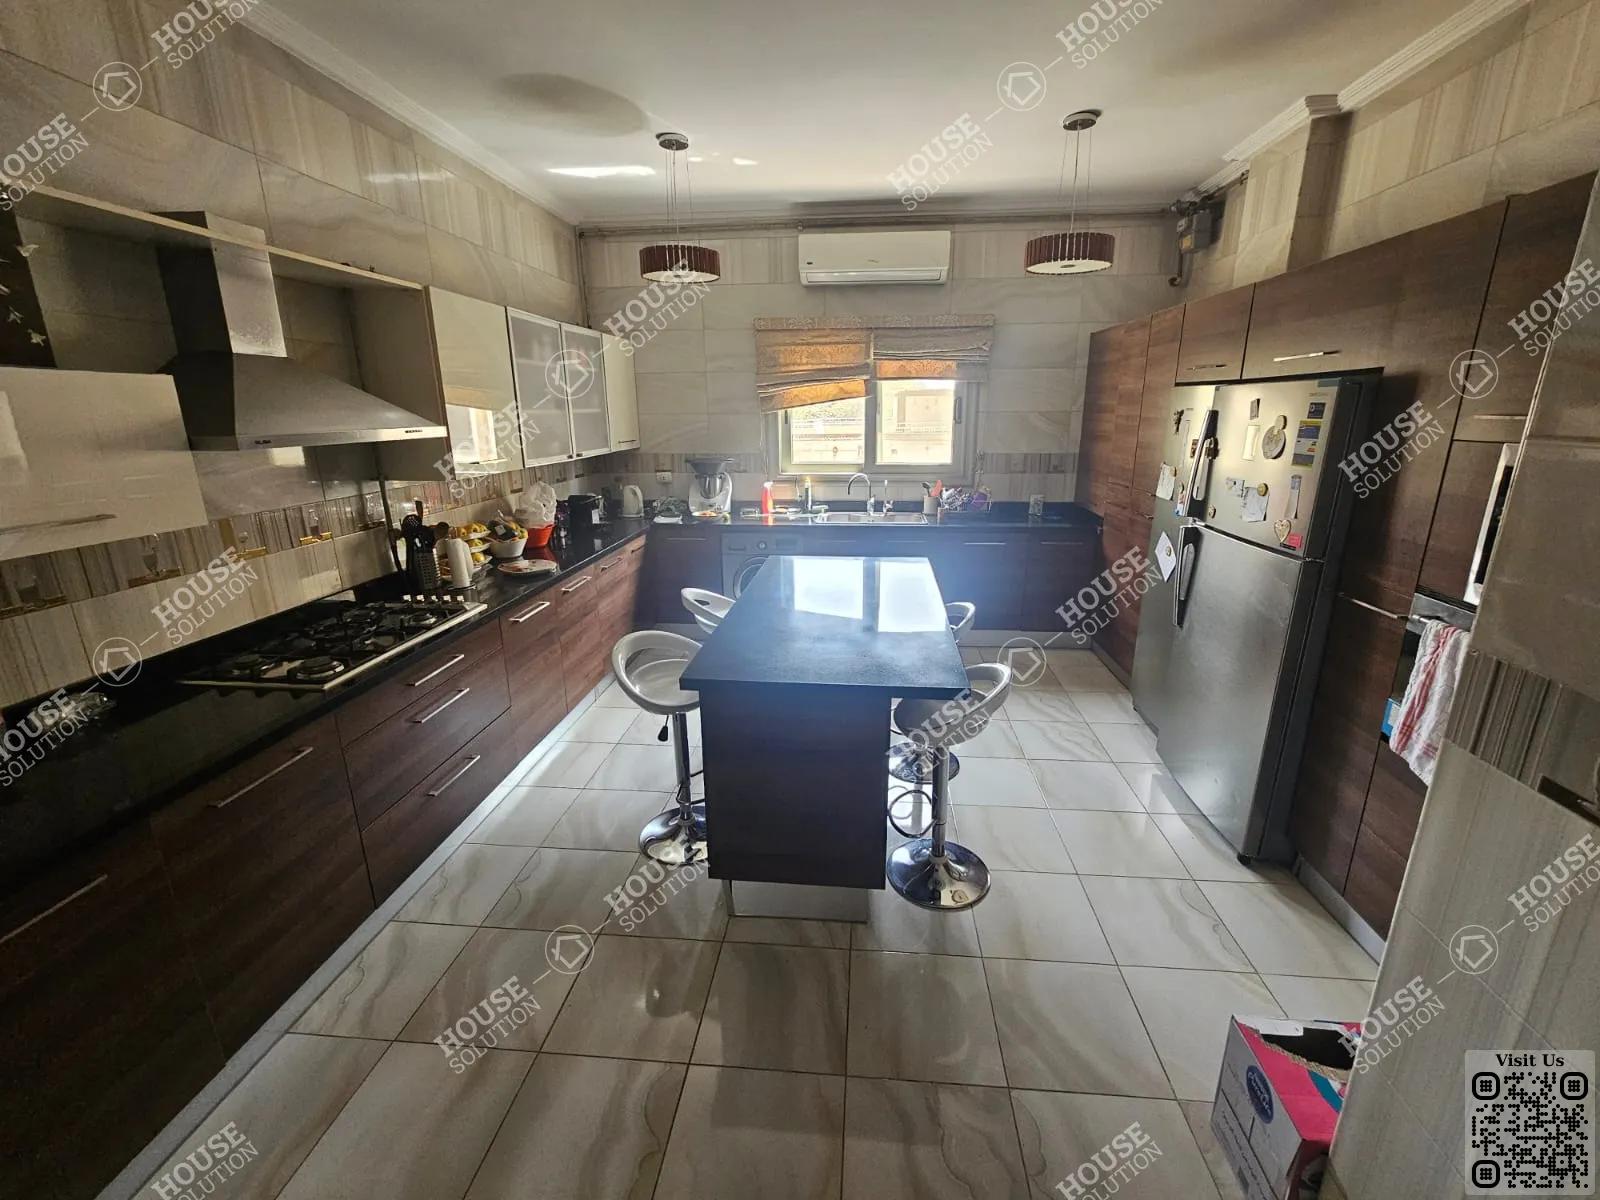 KITCHEN  @ Apartments For Rent In Maadi Maadi Sarayat Area: 360 m² consists of 4 Bedrooms 5 Bathrooms Modern furnished 5 stars #2616-1